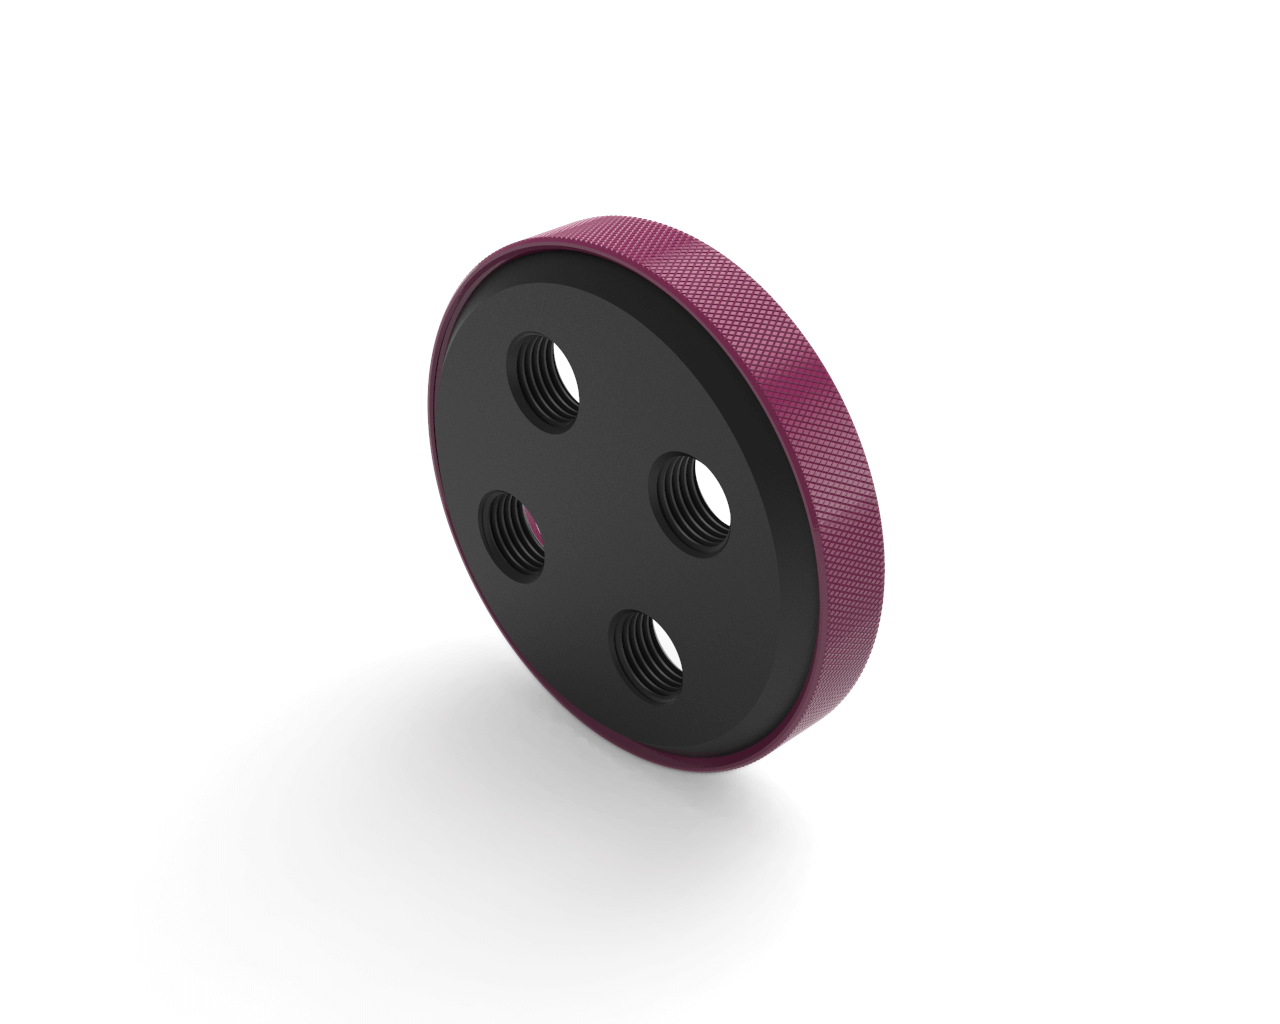 PrimoChill CTR Replacement SX Compression Ring - PrimoChill - KEEPING IT COOL Magenta